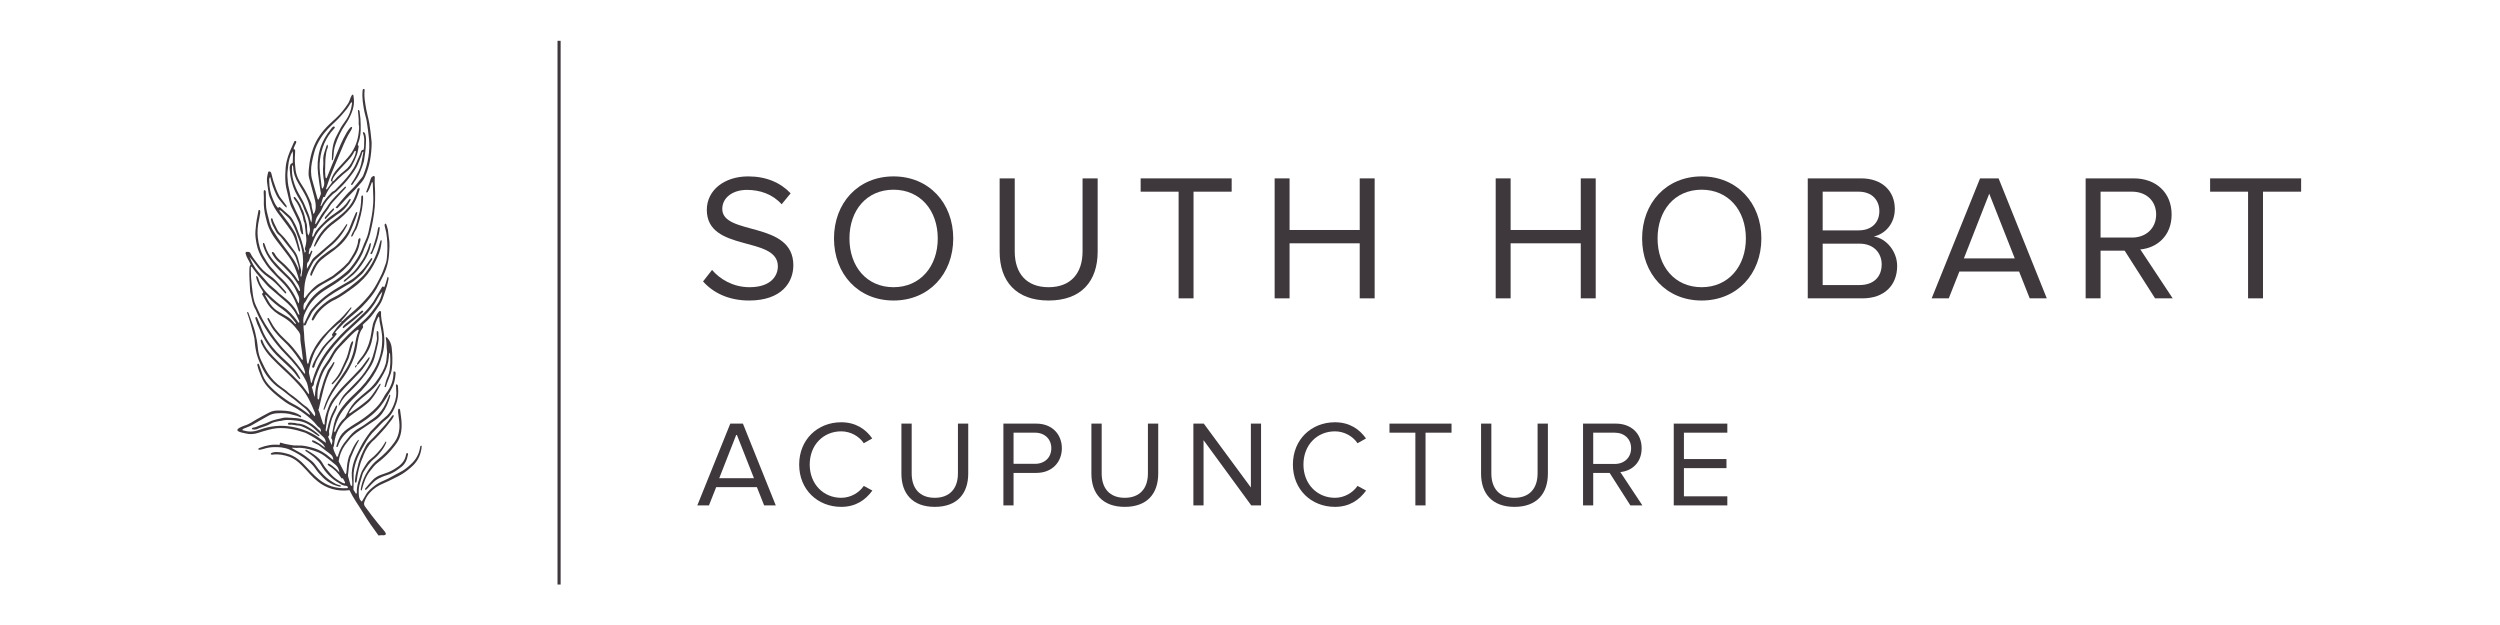 South Hobart Acupuncture Now Offers Quality Acupuncture Services in Greater Hobart Area